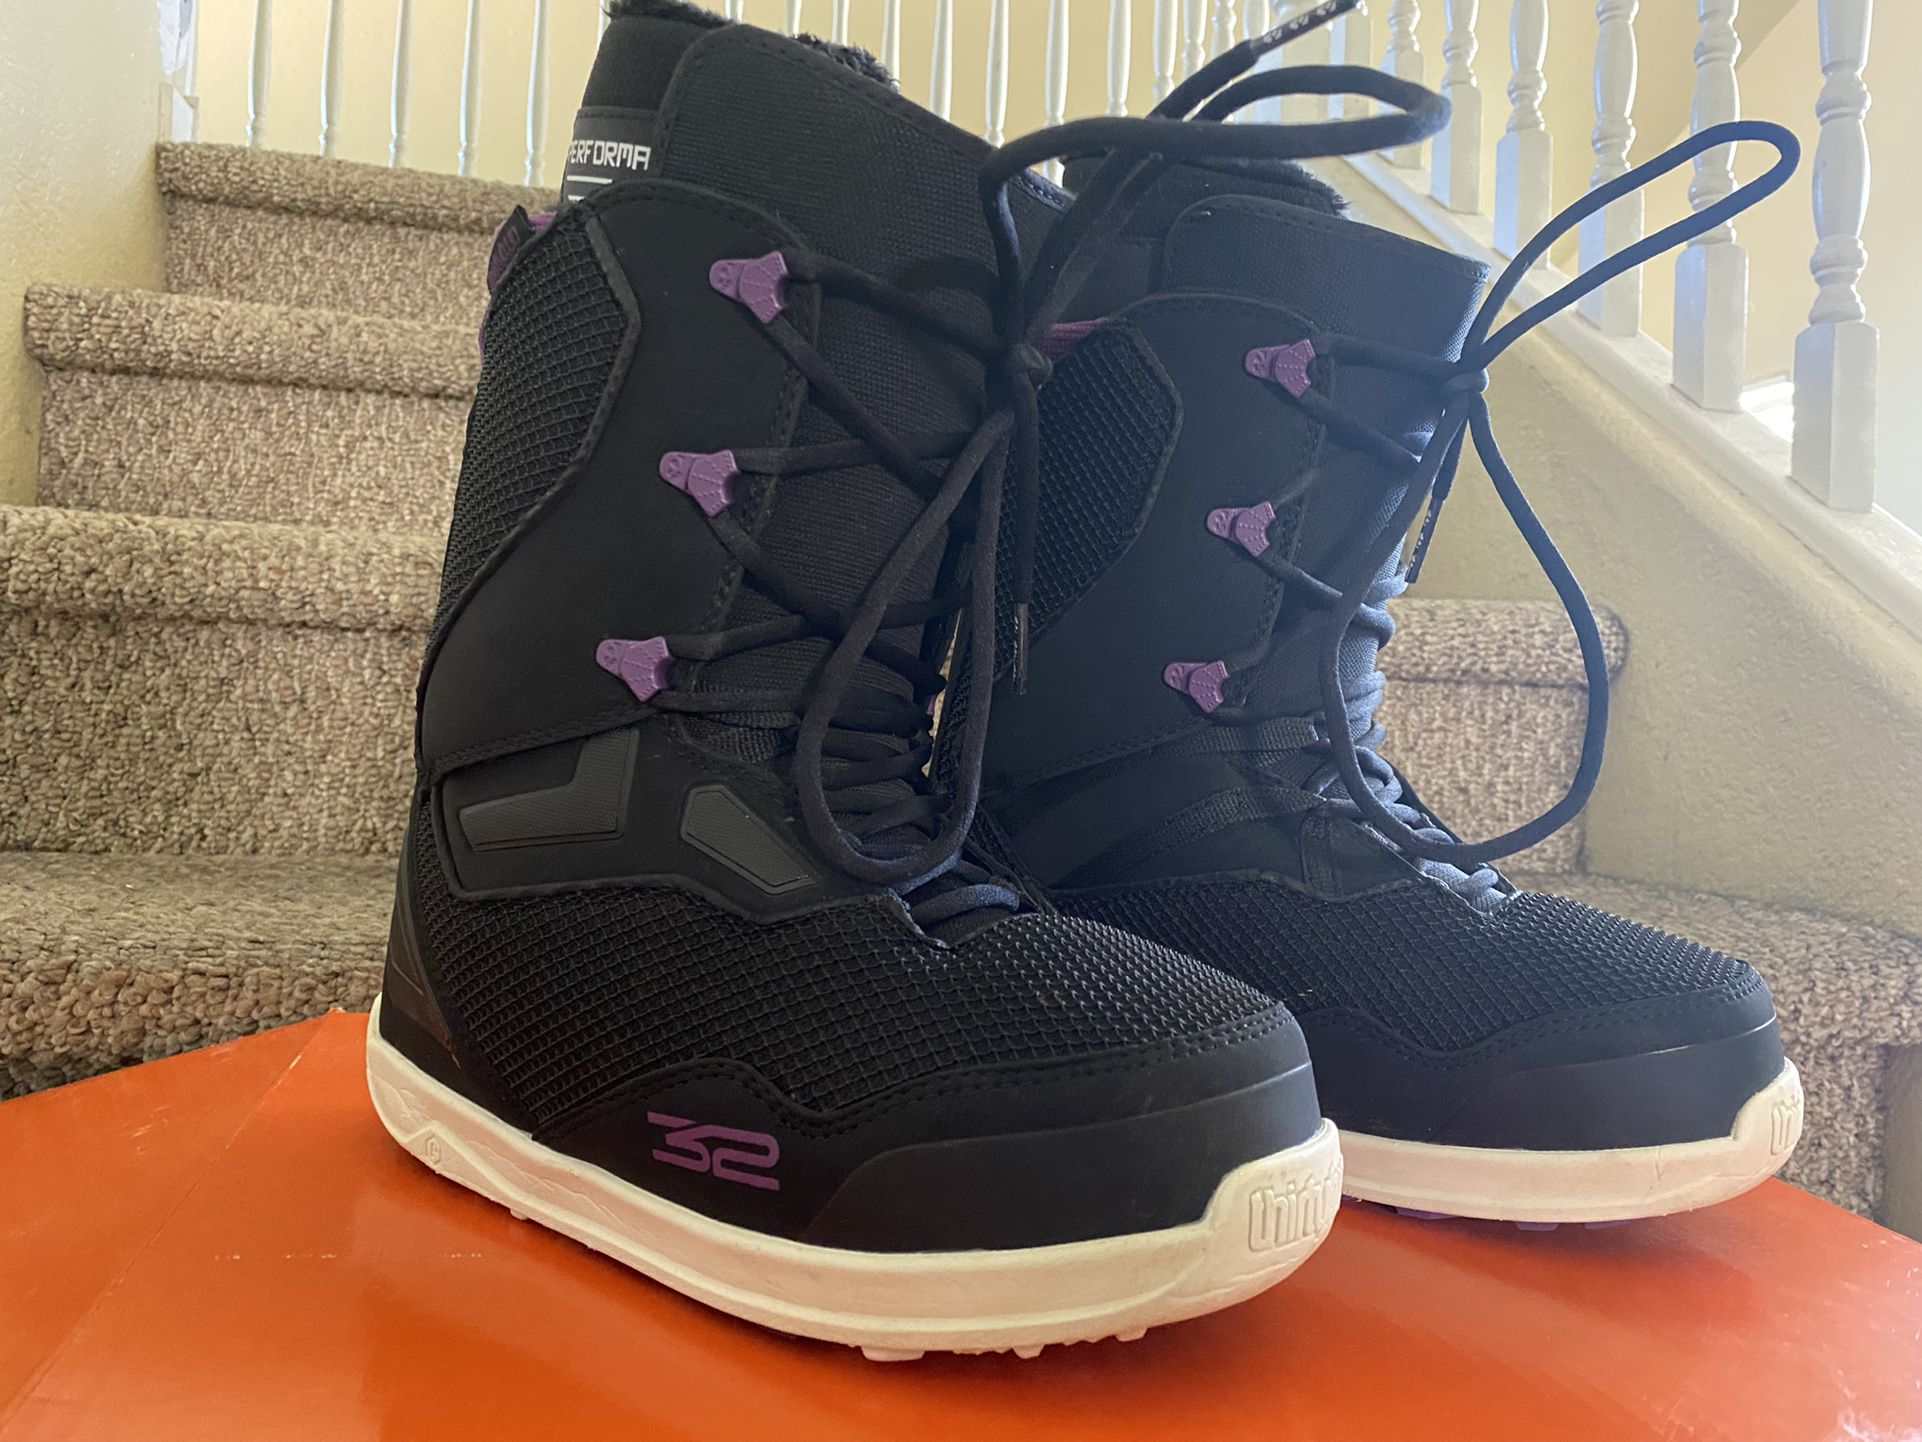 NEW THIRTYTWO WOMENS LASHED TM2 SNOWBAORDING BOOTS